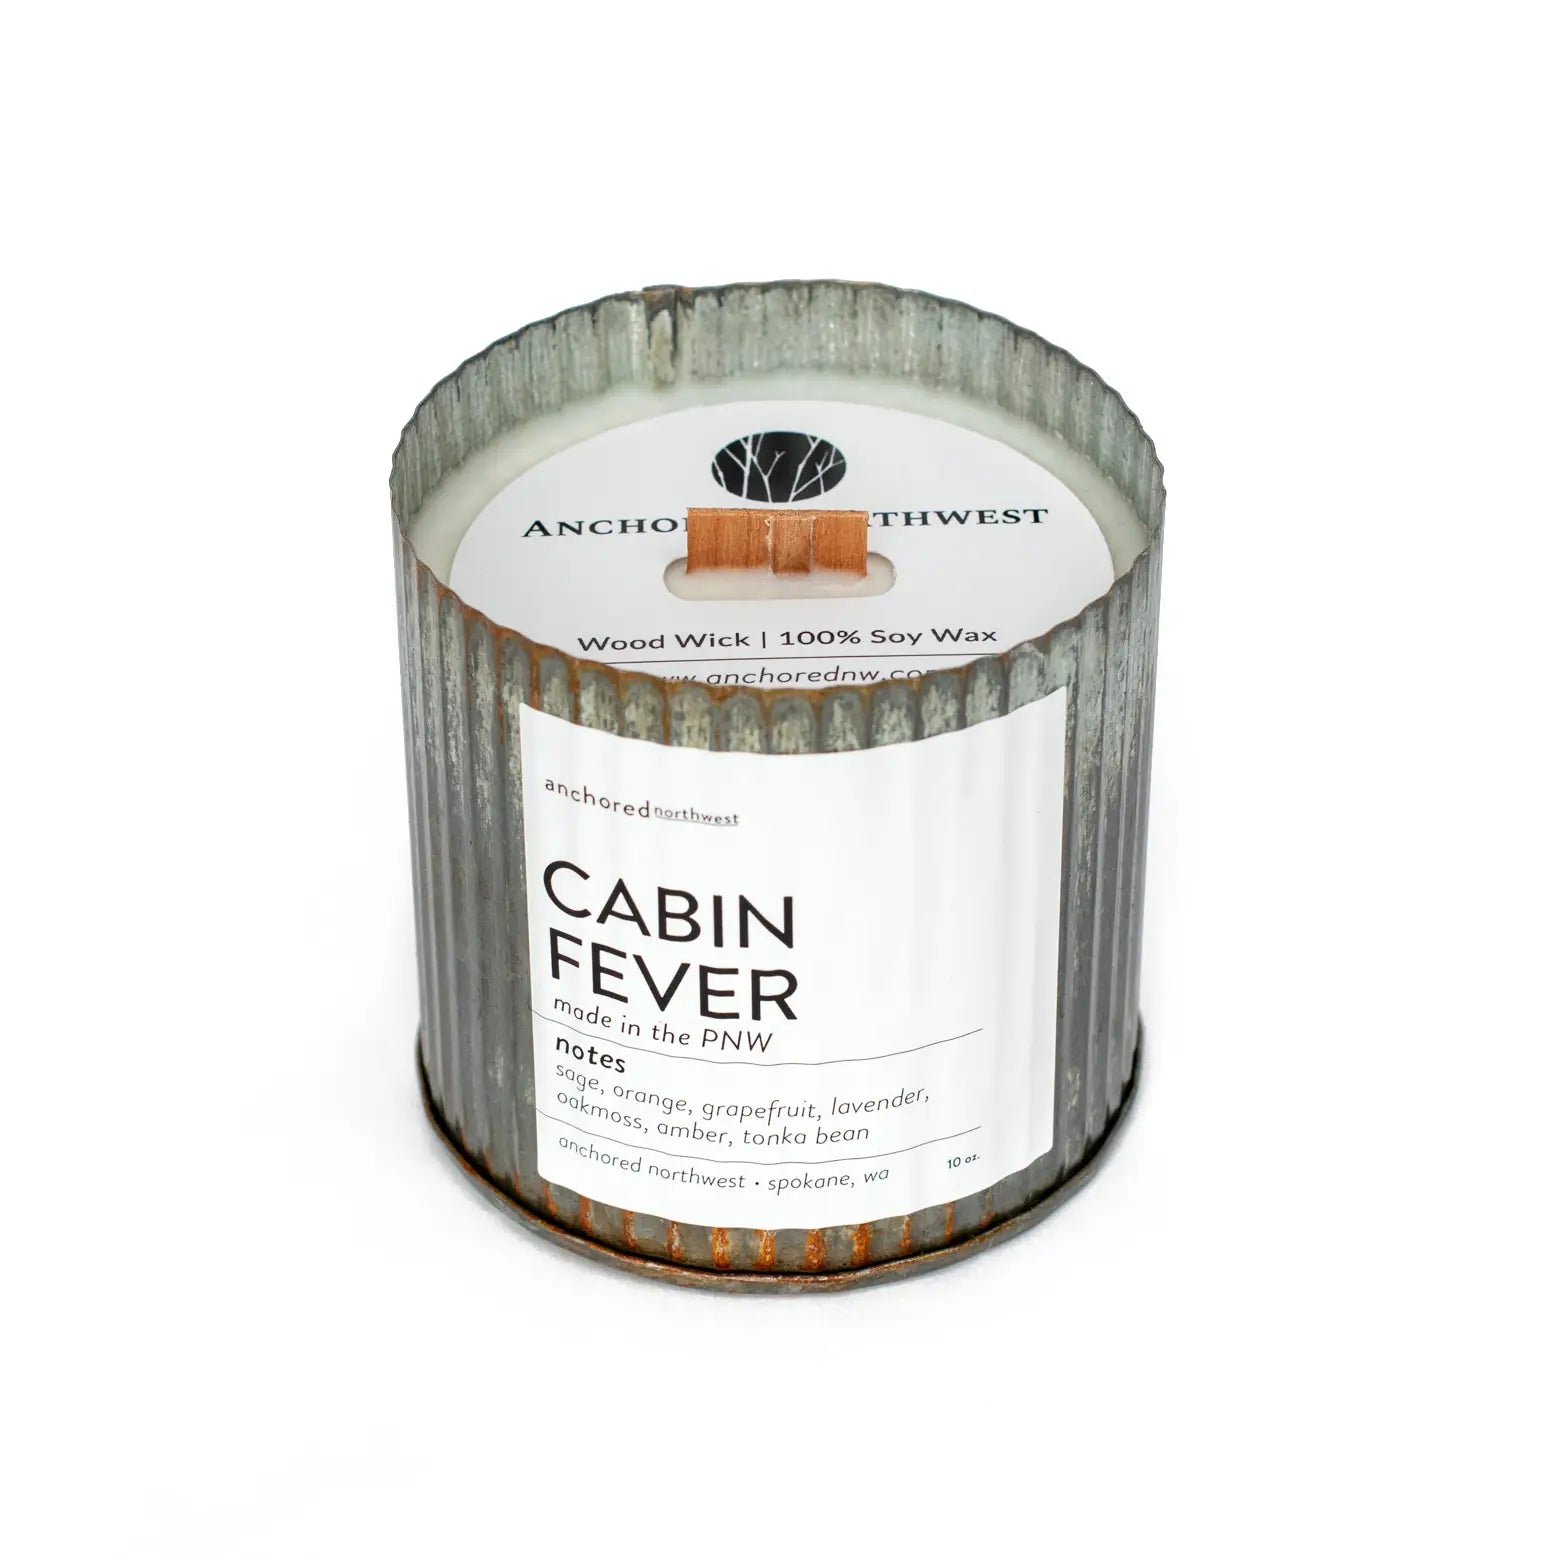 Cabin Fever Wood Wick Rustic - Anchored Northwest